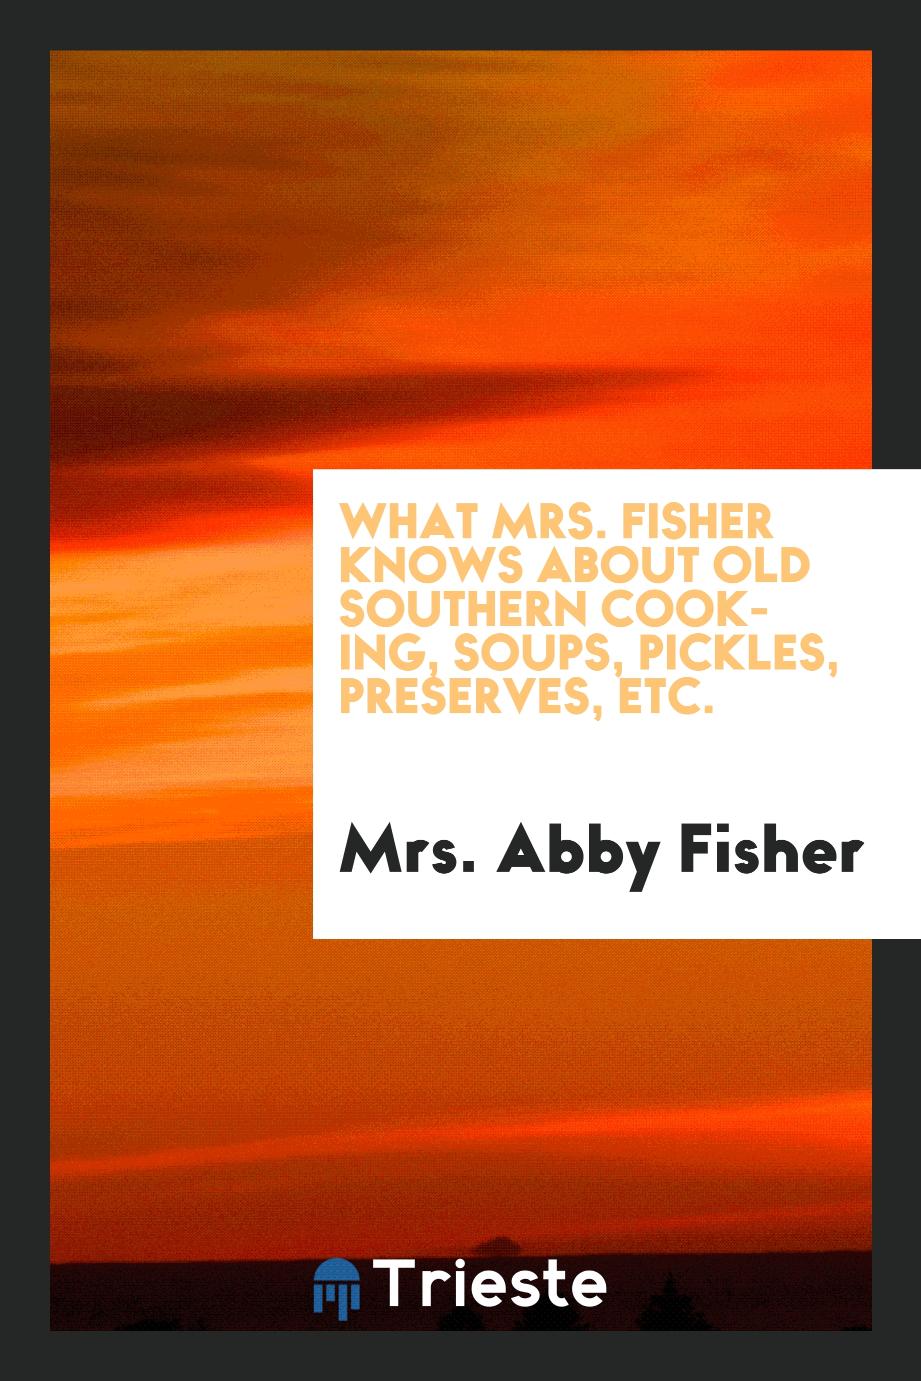 What Mrs. Fisher knows about old southern cooking, soups, pickles, preserves, etc.